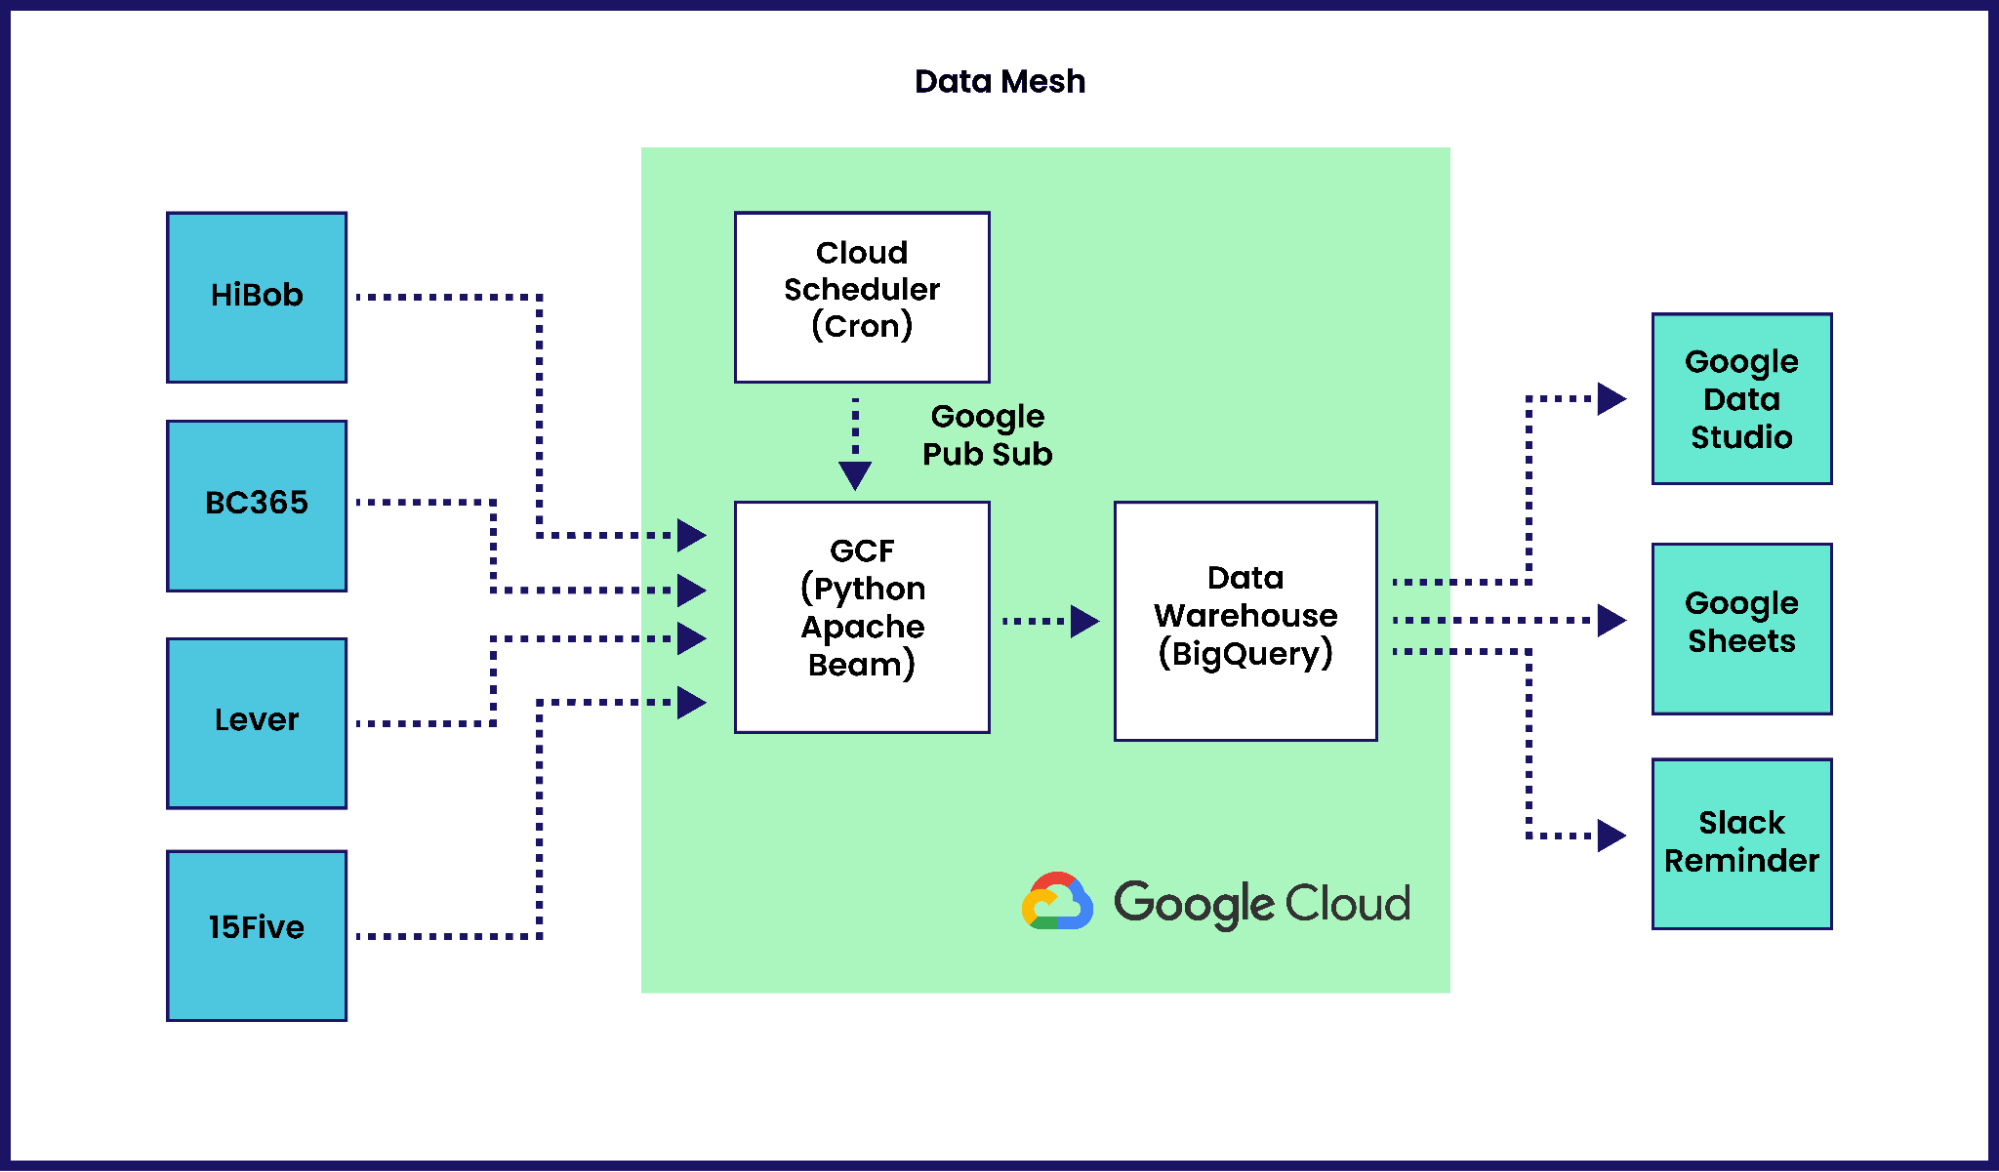 Datamesh - data from Level, 15Five, BC365 to Google Cloud